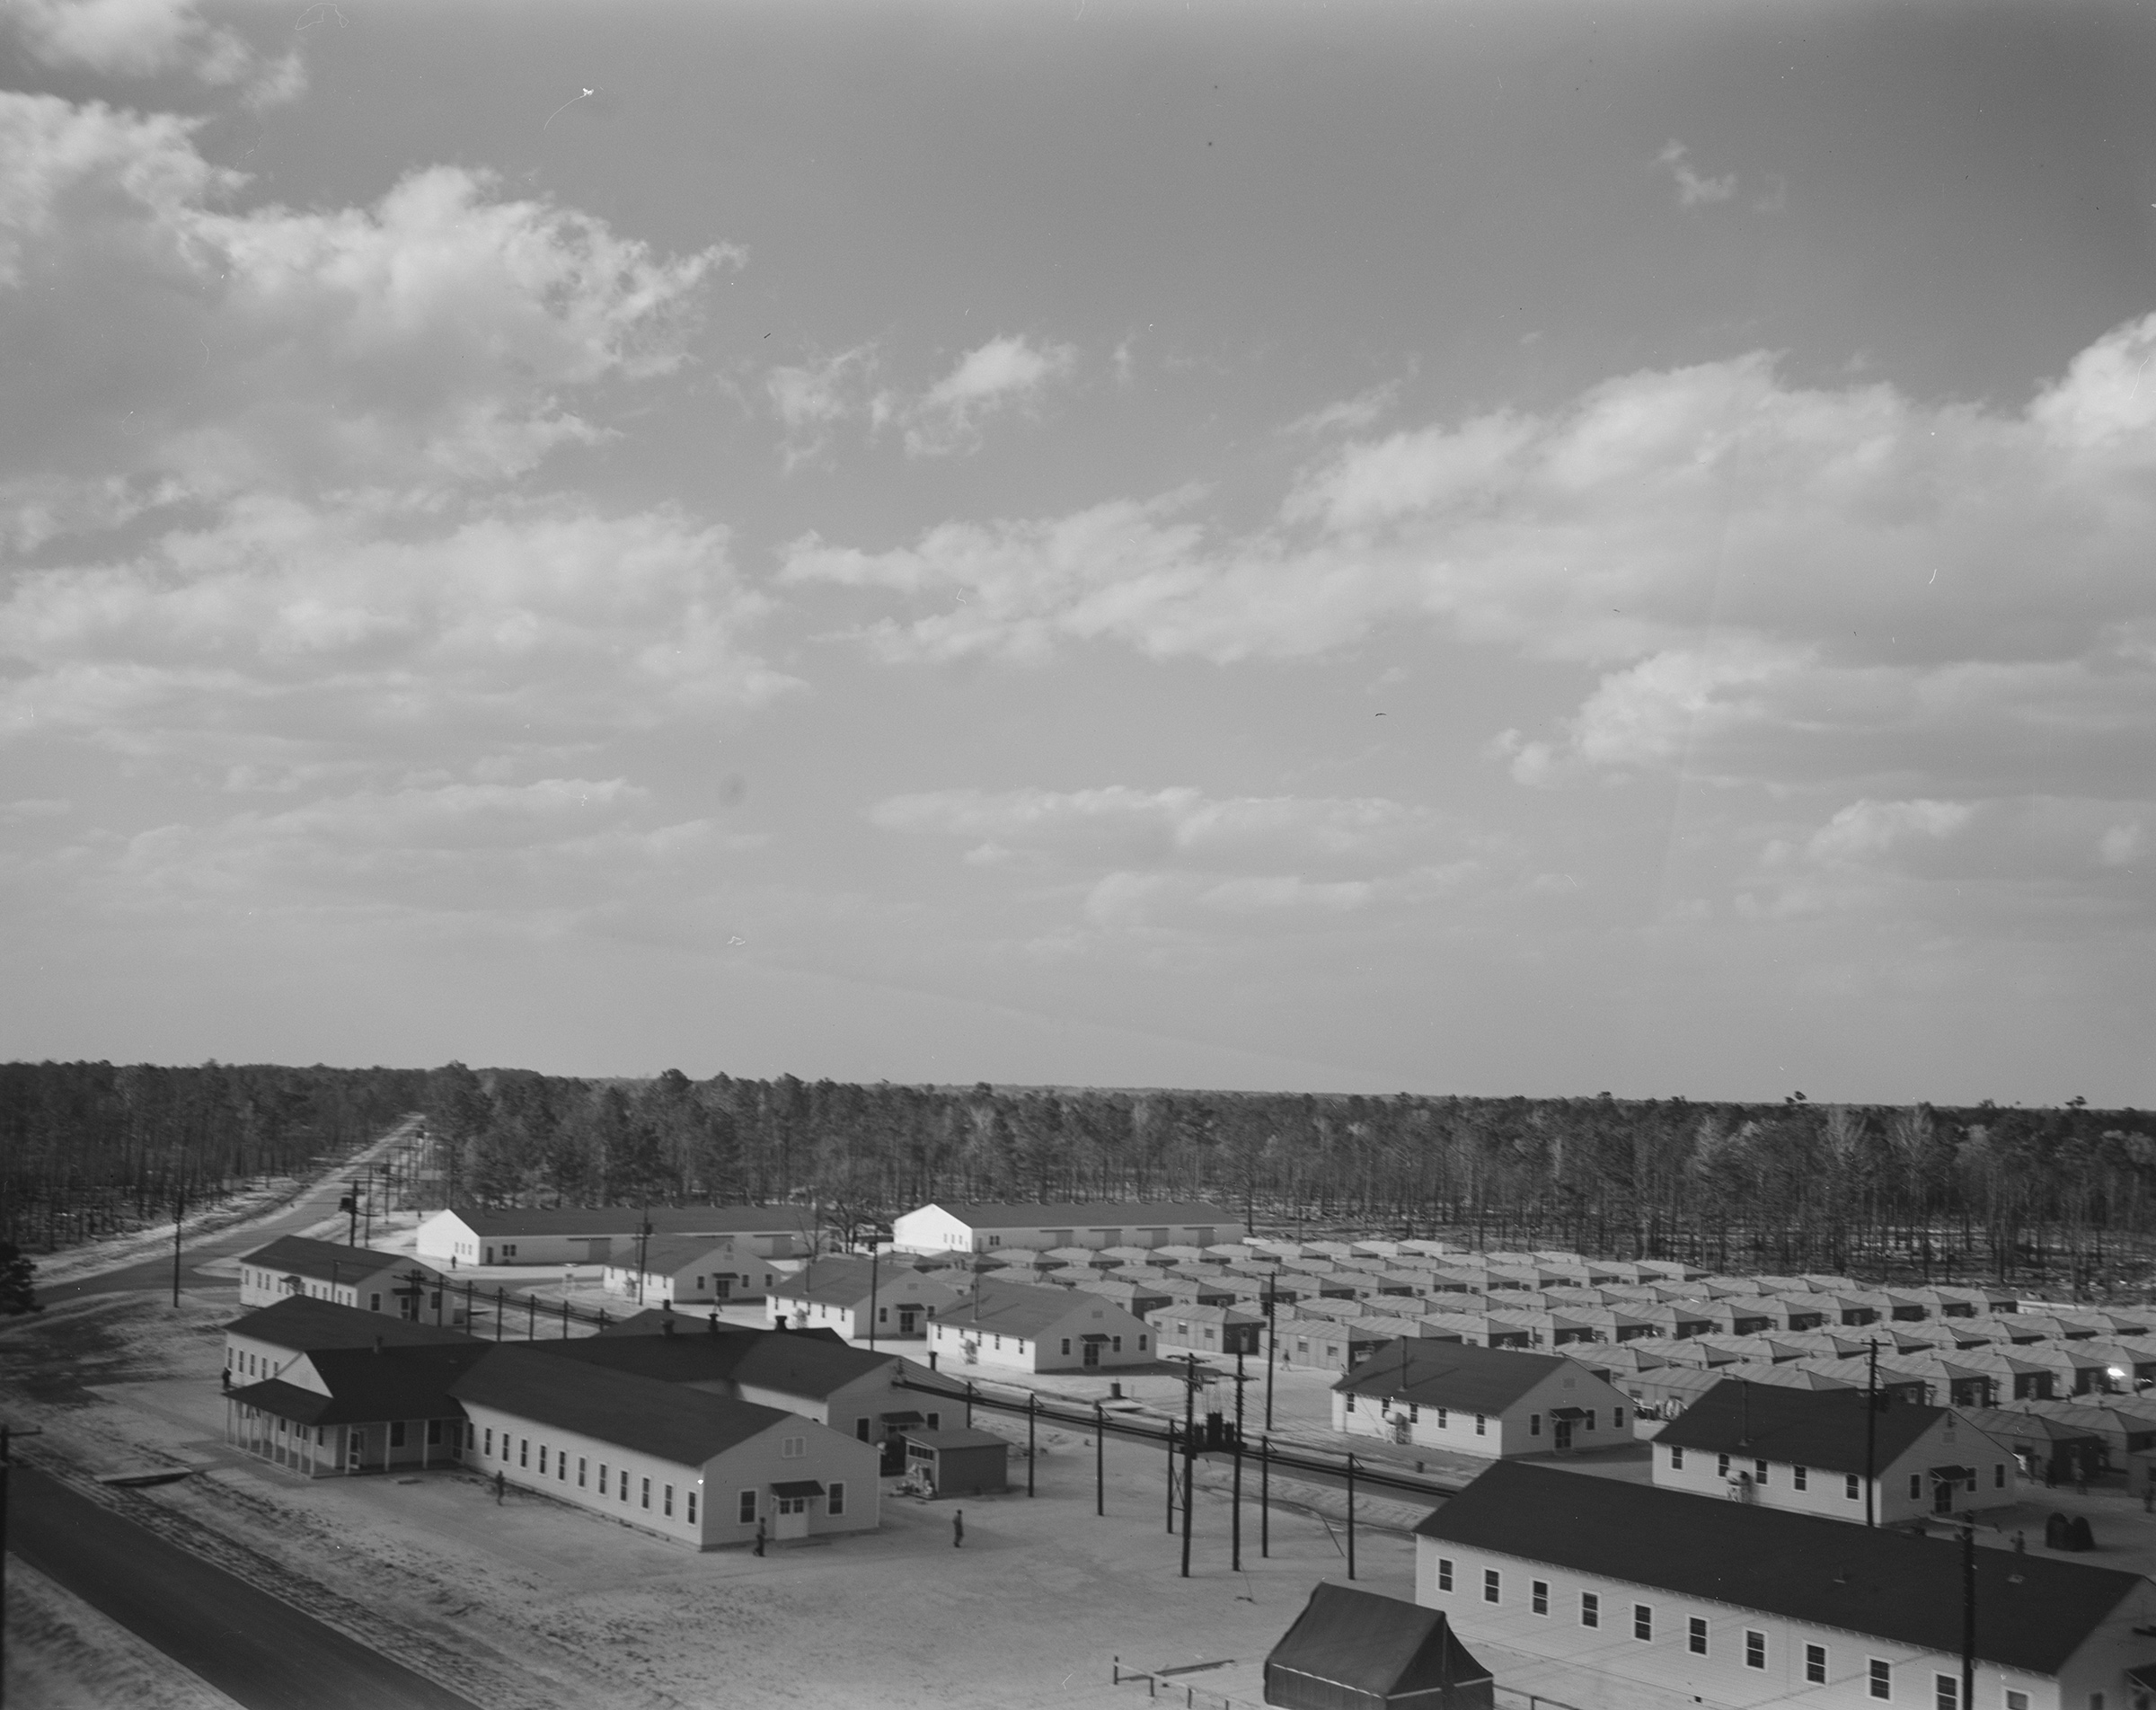 Buildings at Camp Lejeune, 1943. (Library of Congress)